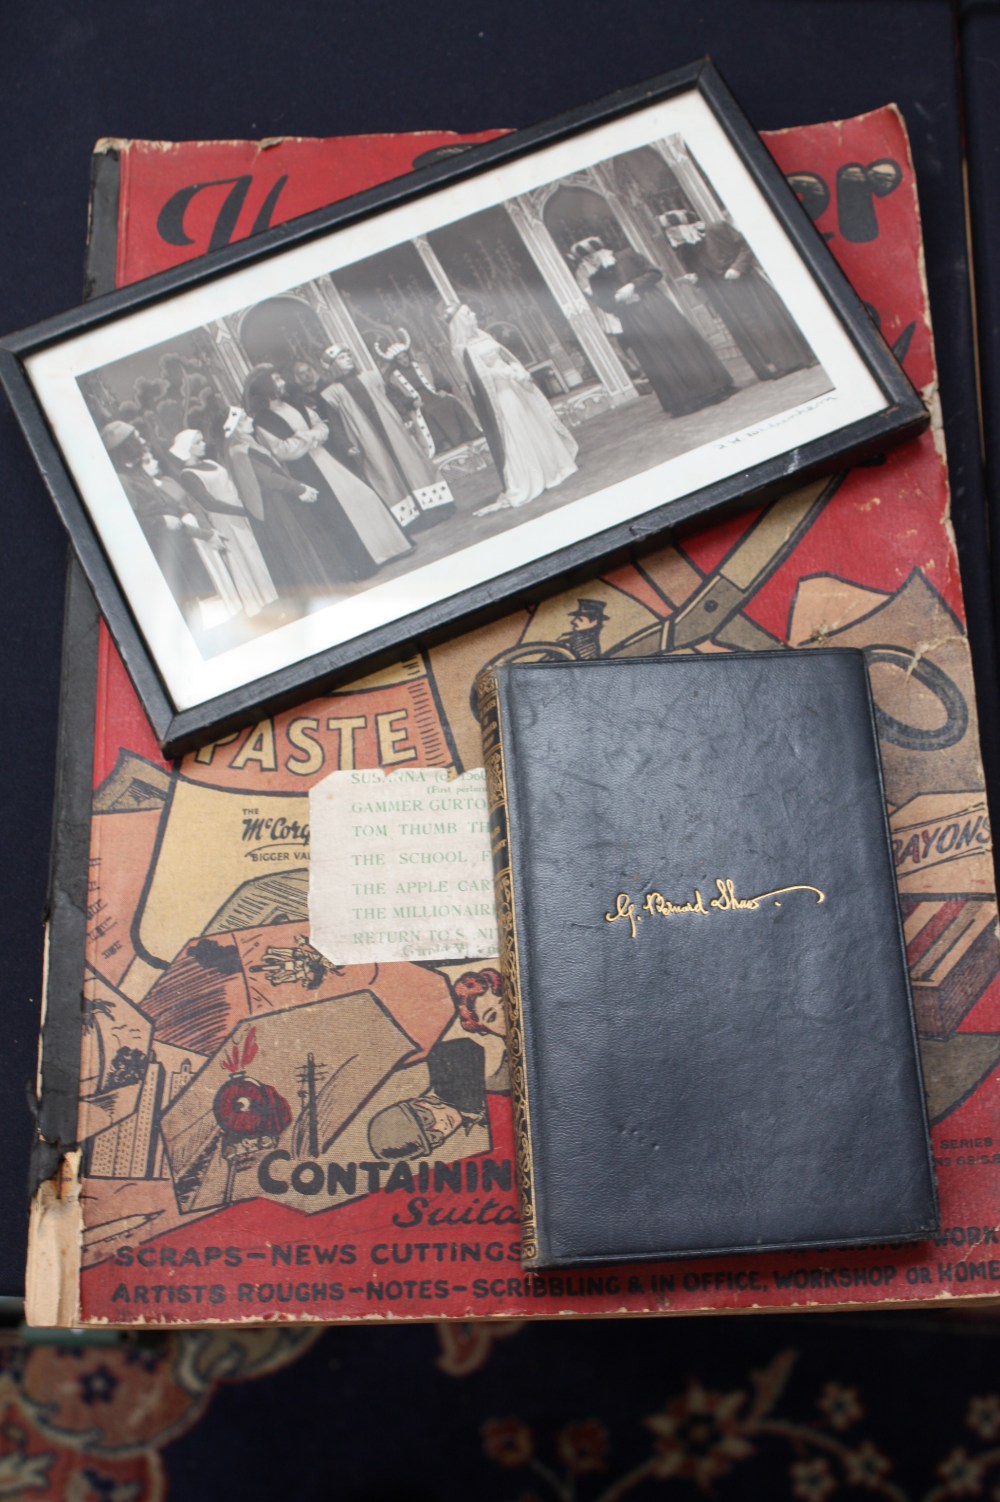 A scrapbook and original pencil drawings of the Harry Pemberton (who changed his name to Reece, when